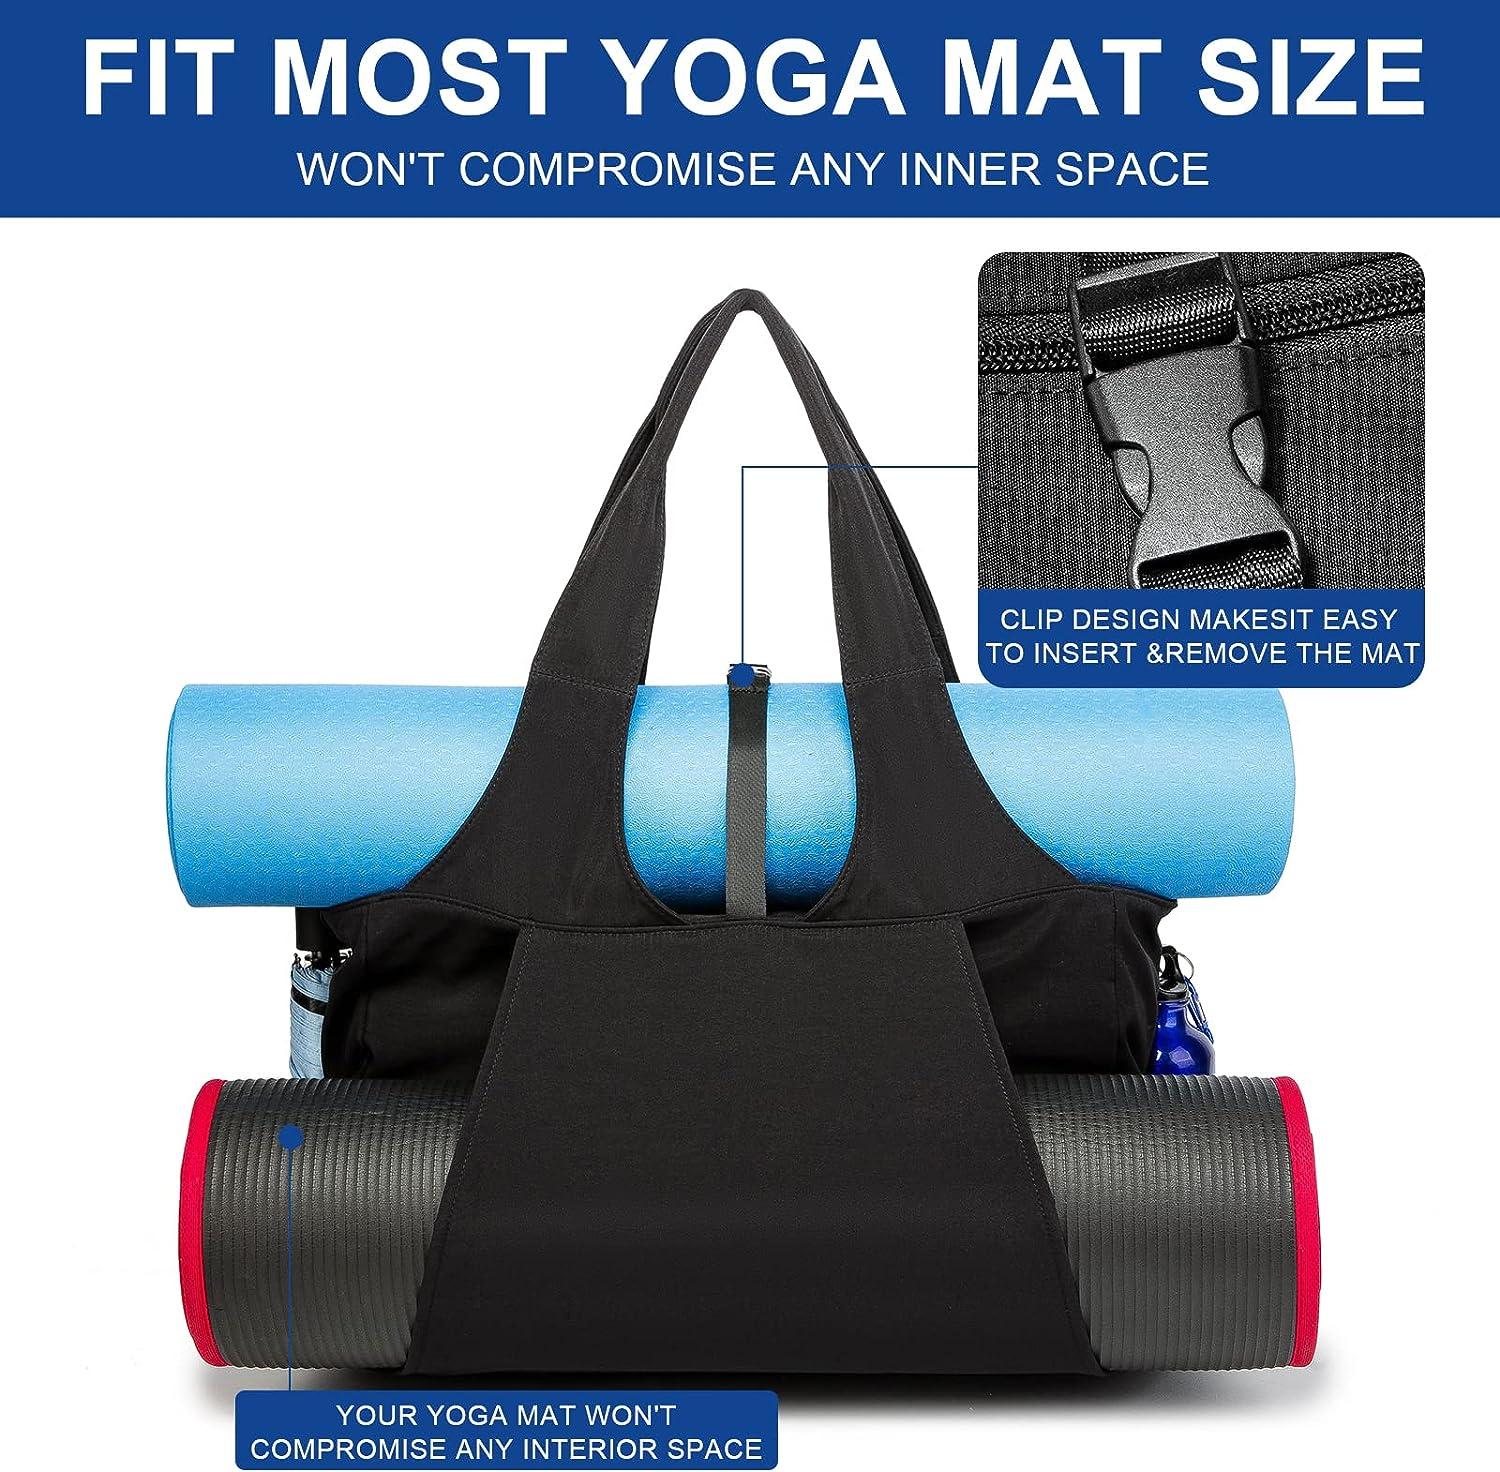 People often wonder how big our XL Yoga Mat Bag is and what can fit in it?  Extra-large capacity means fits standard siz…